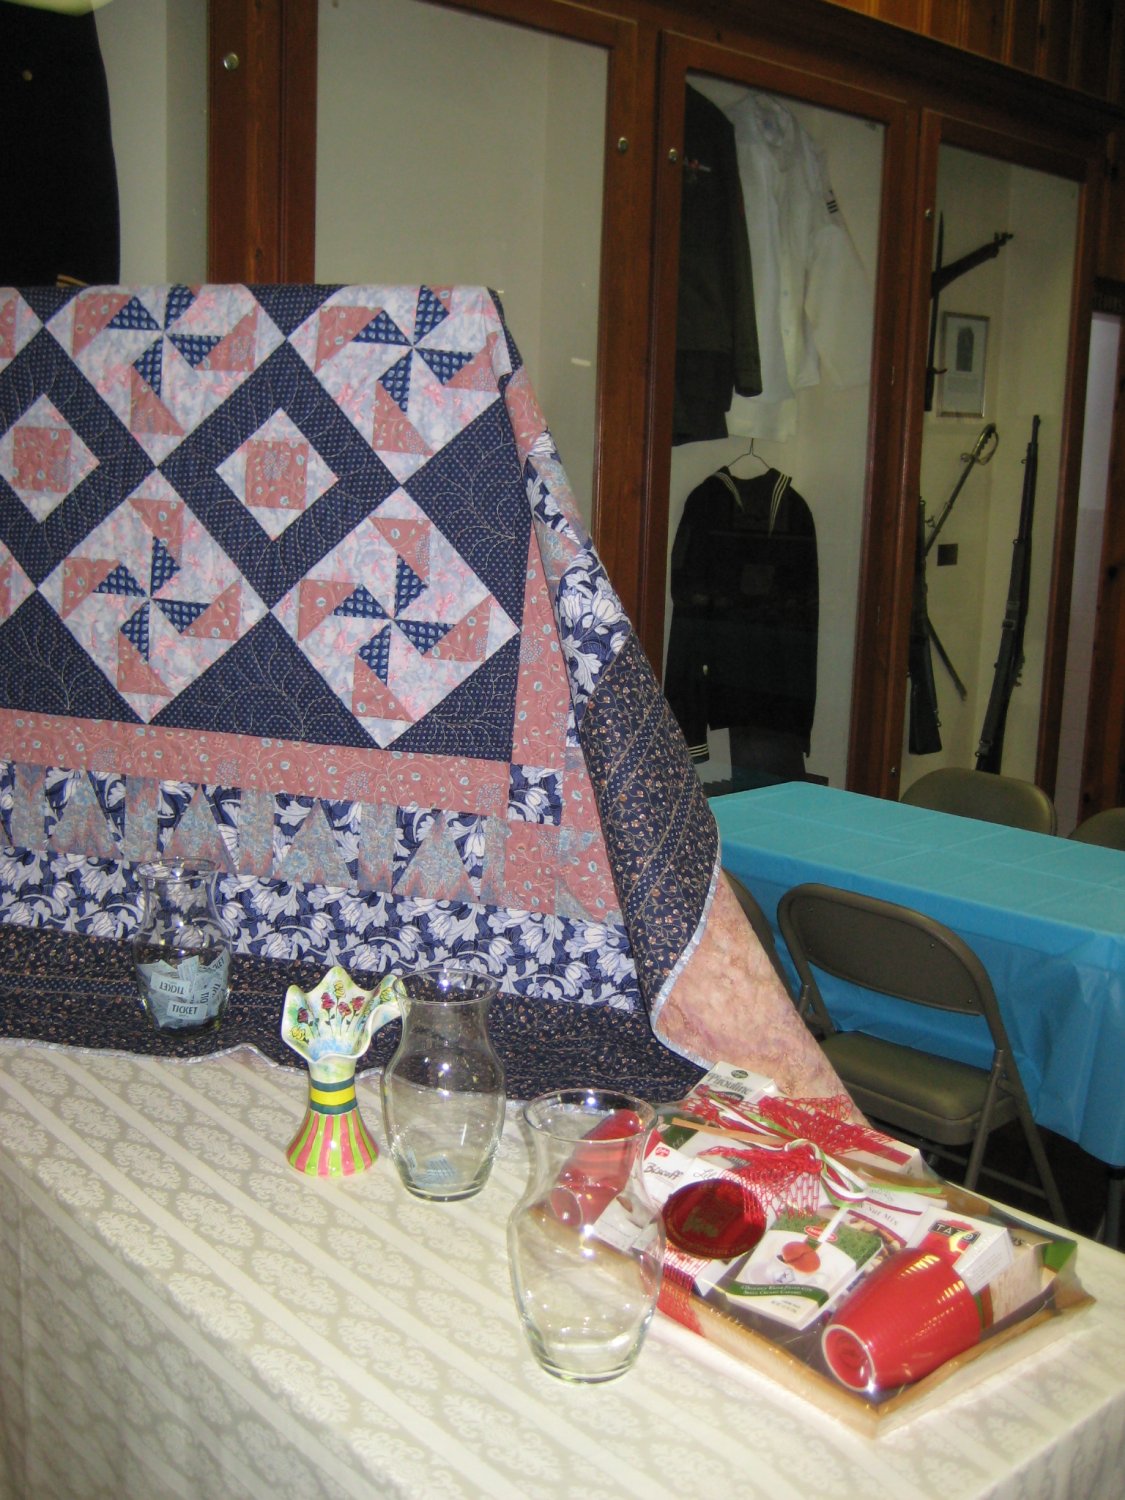  Raffle Items: The quilt was handcrafted and donated by Alice Washburn, Nancie Cameron's sister; the ceramic vase was handcrafted and donated by Teri Nudo; and the Coffee and Tea Gift Basket was donated by Loretta Quigley.&nbsp; 